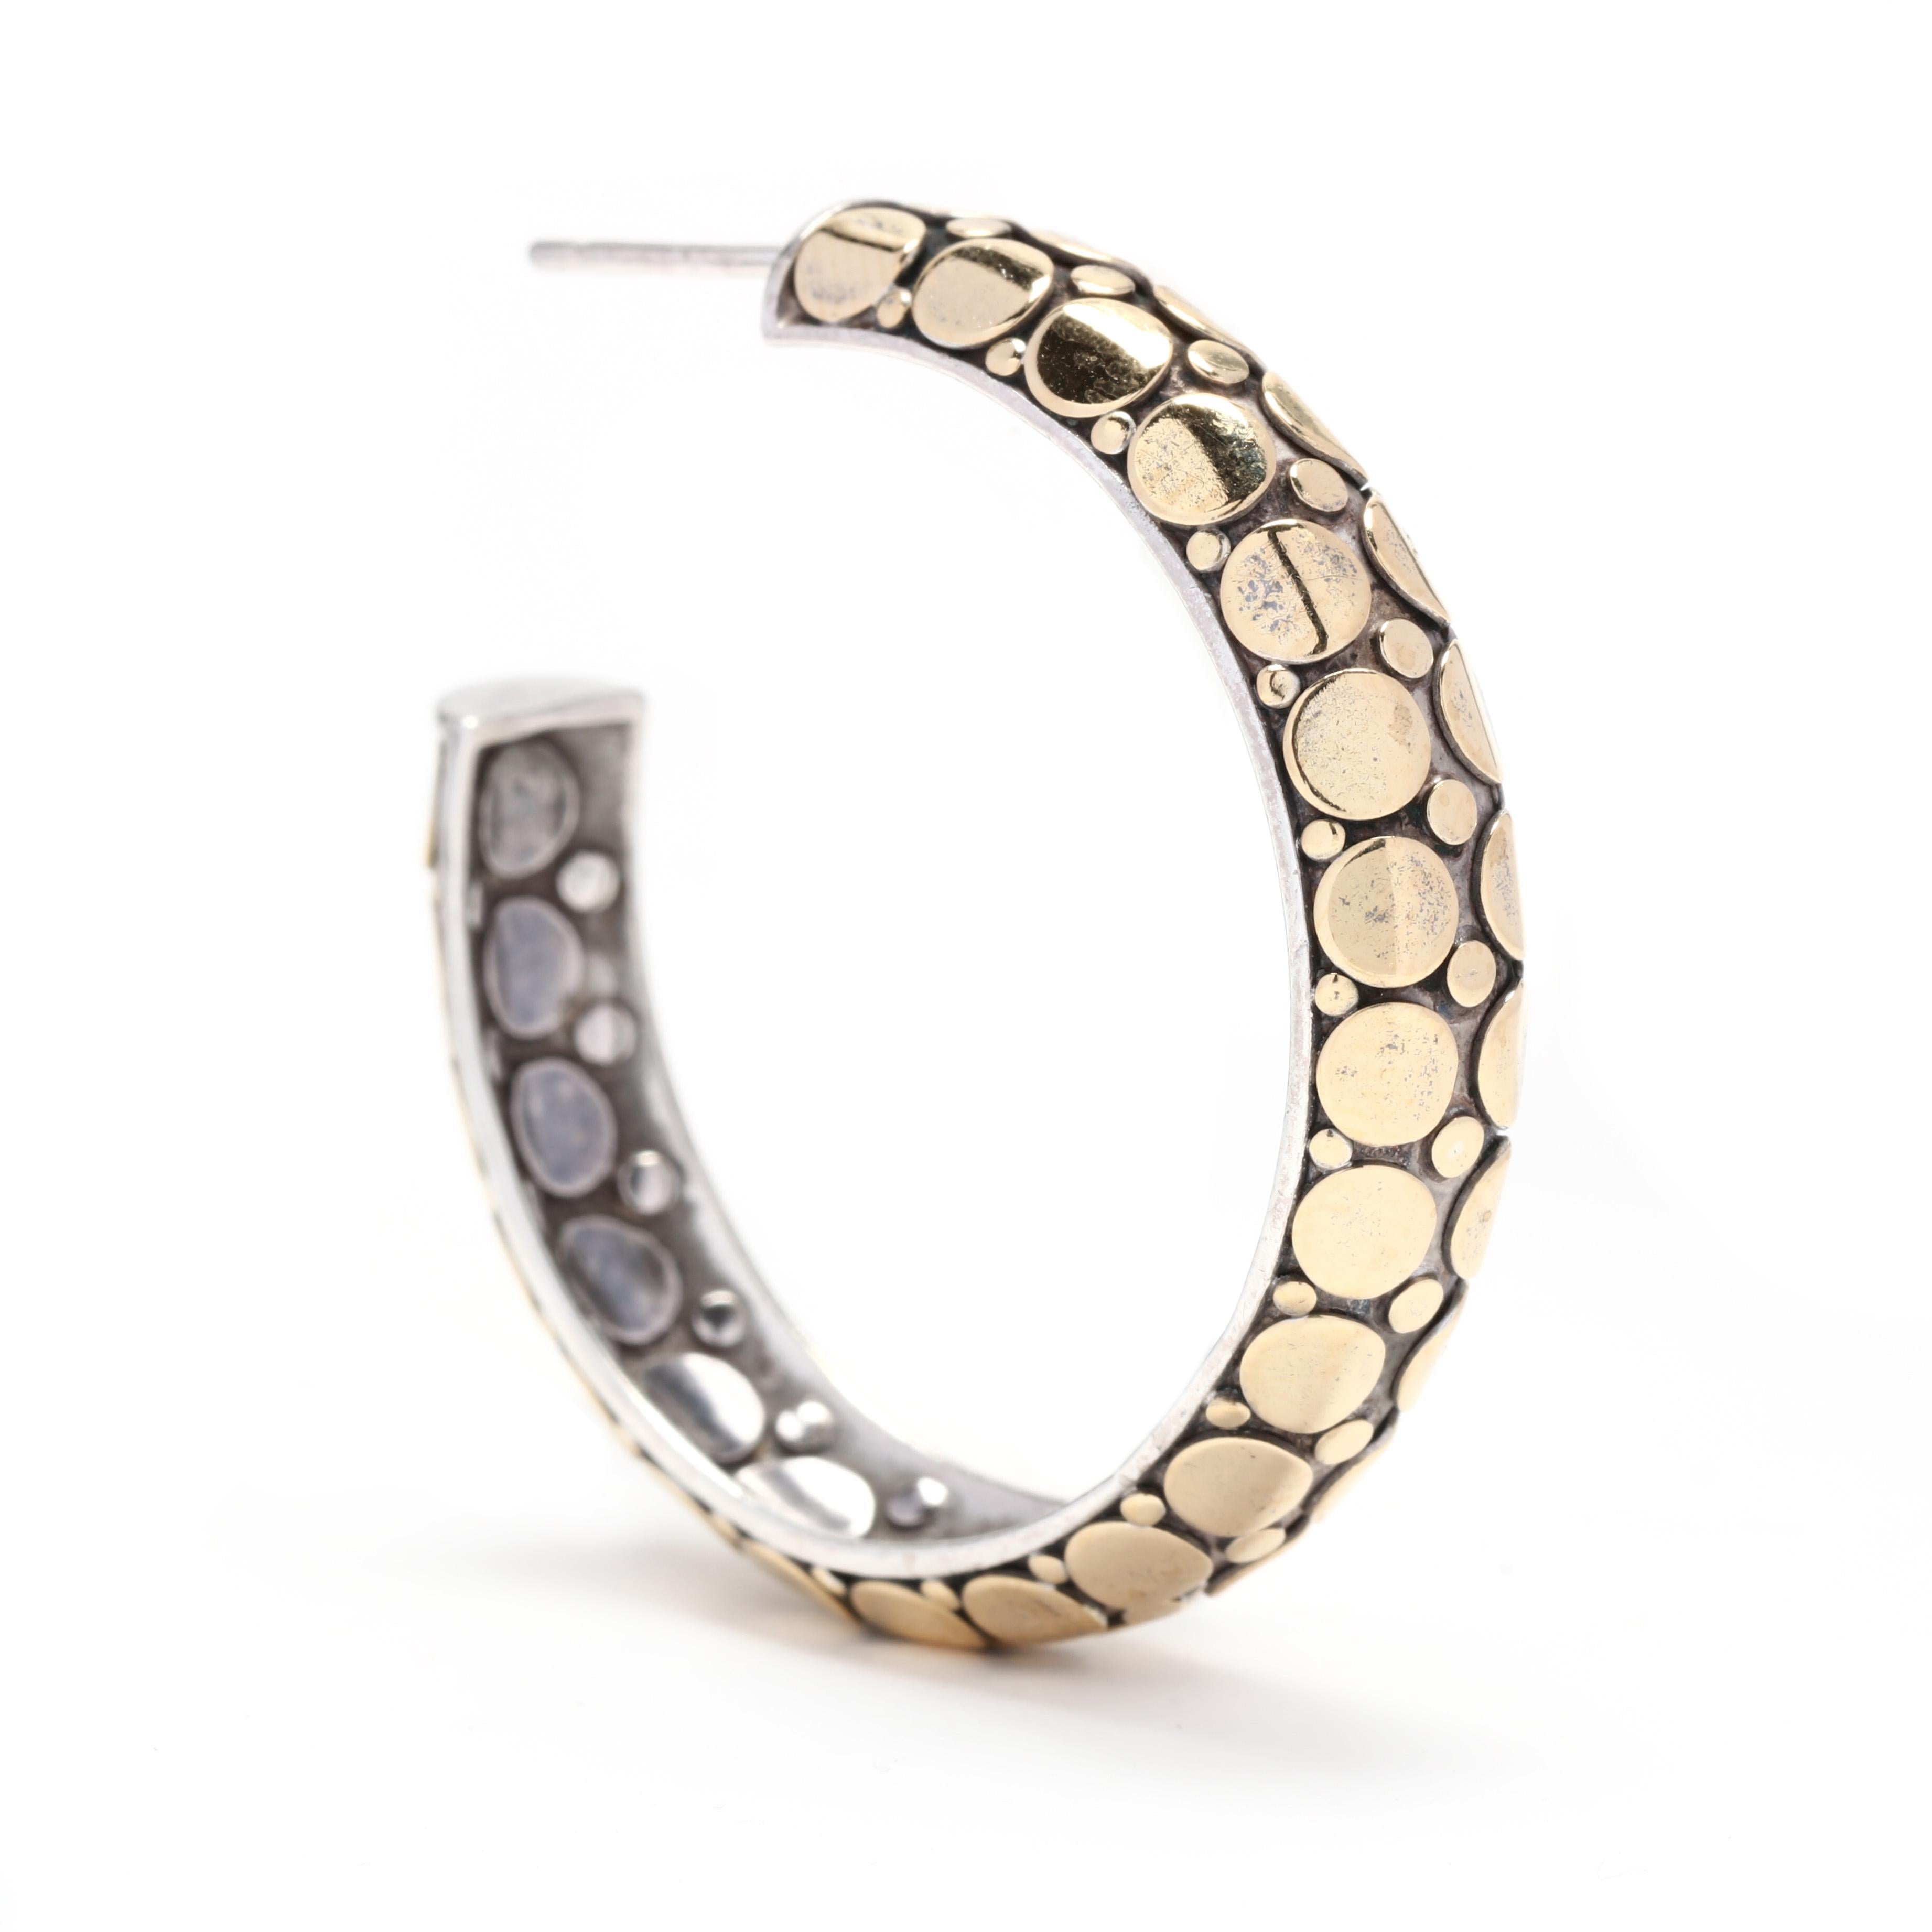 A pair of John Hardy 18 karat yellow gold and sterling silver dot hoop earrings. These earrings features a slightly domed silver hoop with applied gold dot accents with pierced push backs.

Length: 1 5/16 in.

Width: 5/16 in.

Weight: 15.1